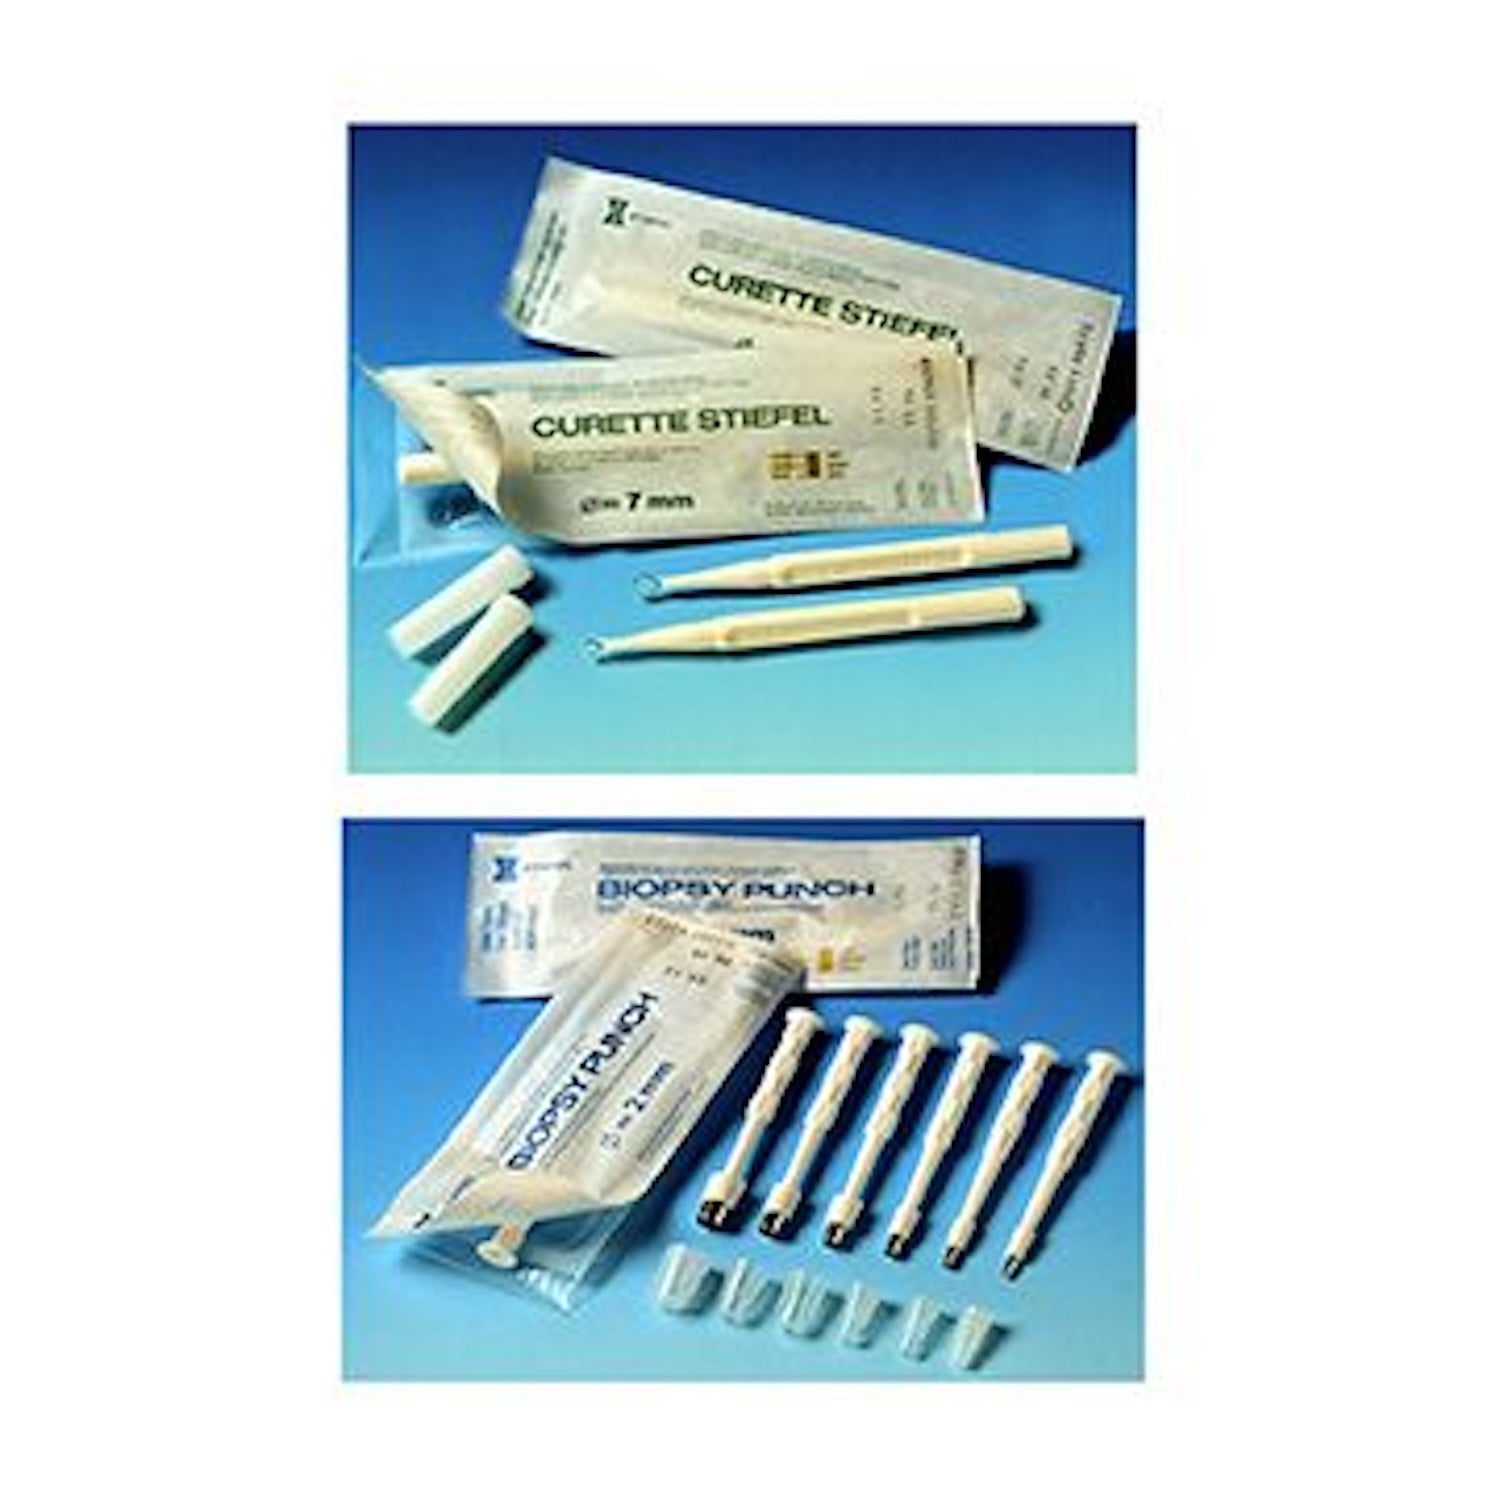 Stiefel Biopsy Punches | Pack of 10 & Stiefel Biopsy Punches | 2mm | Pack of 10